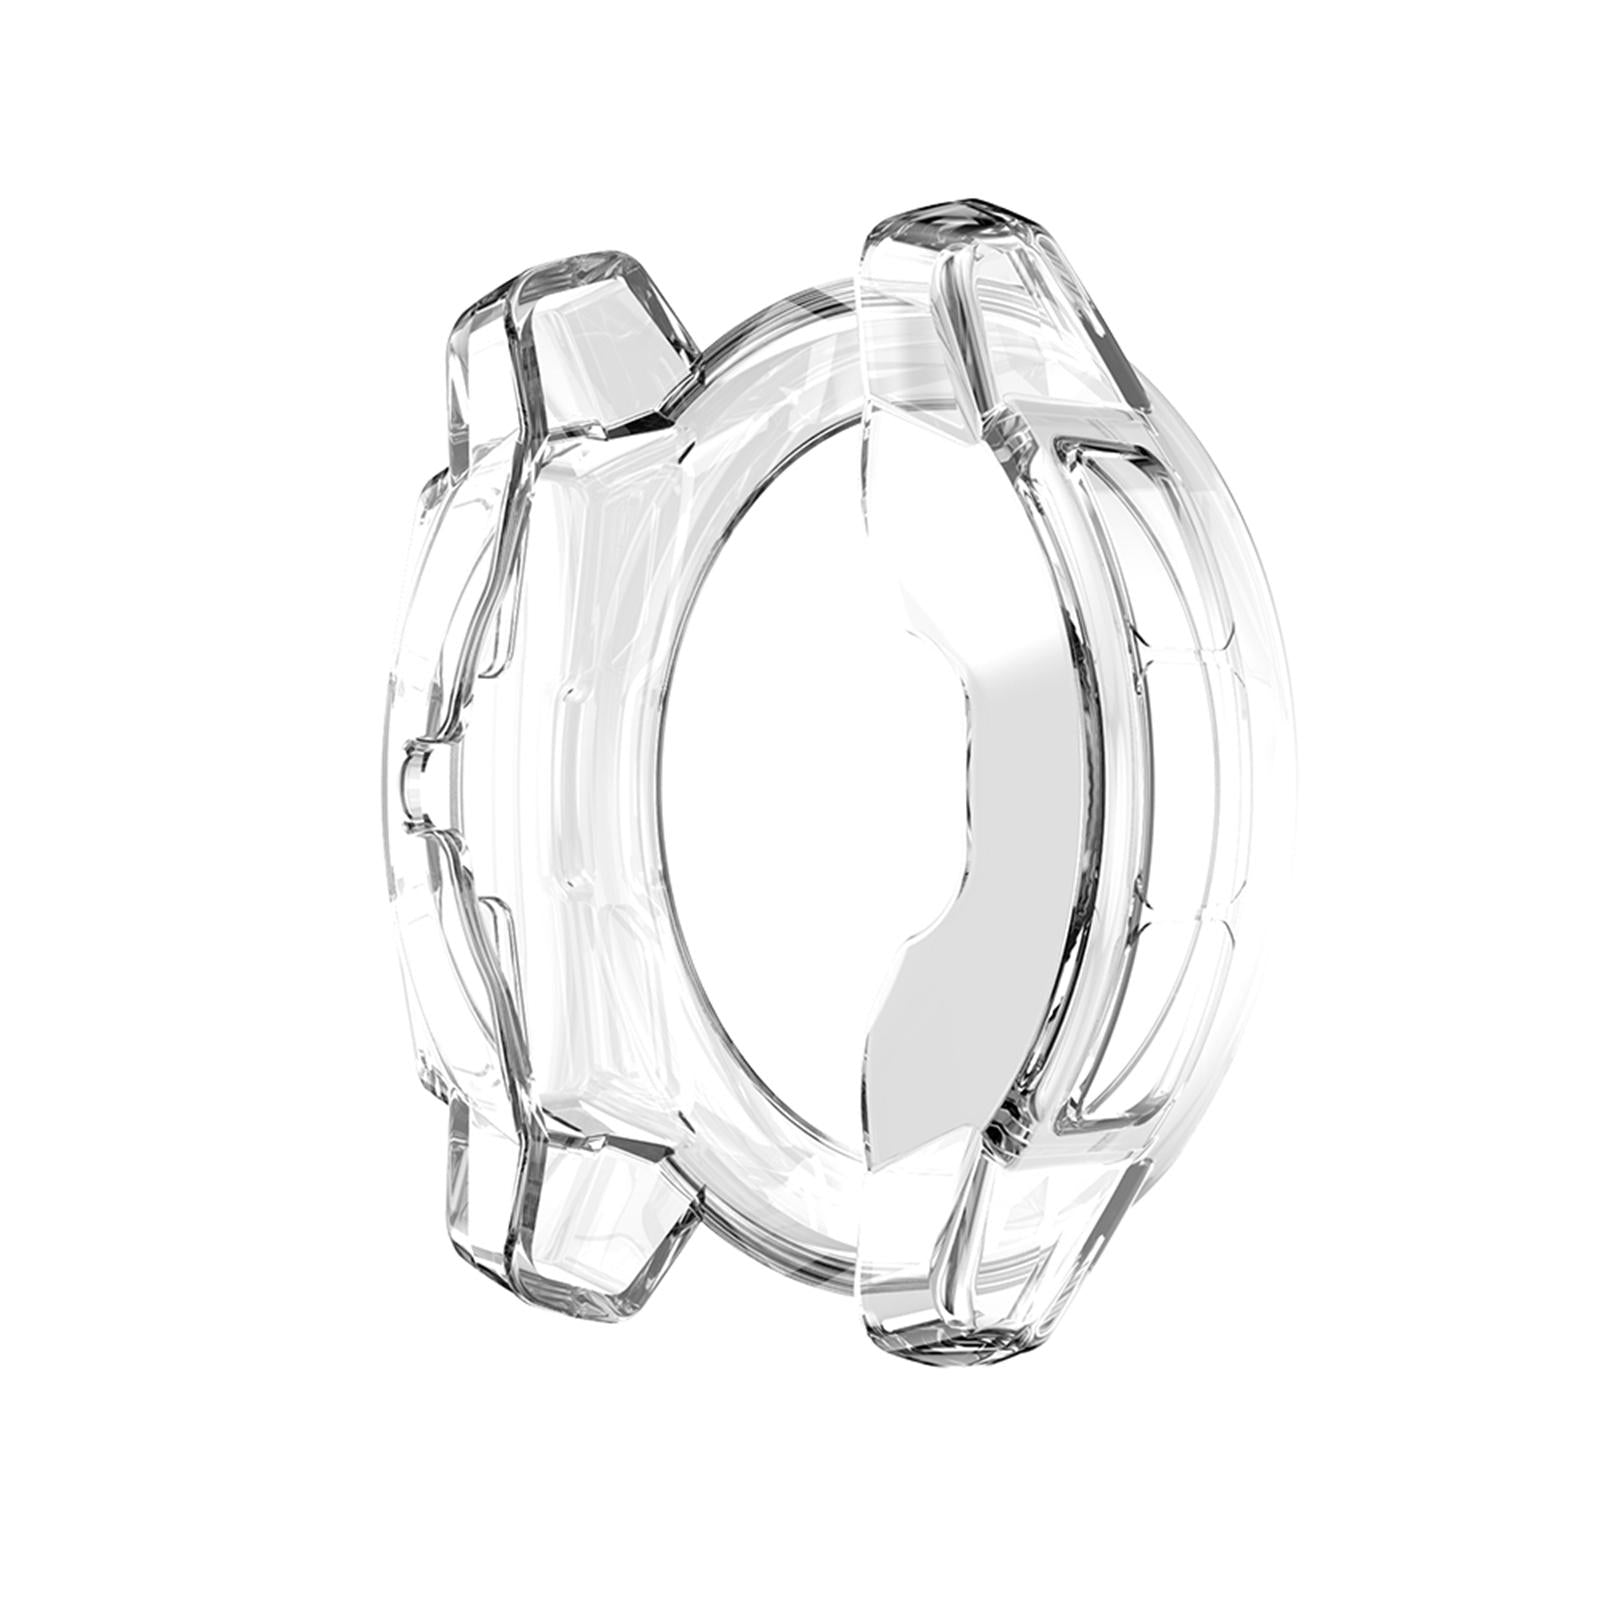 TPU Protective Case Shell Full Body for Garmin Instinct Smartwatch  Clear